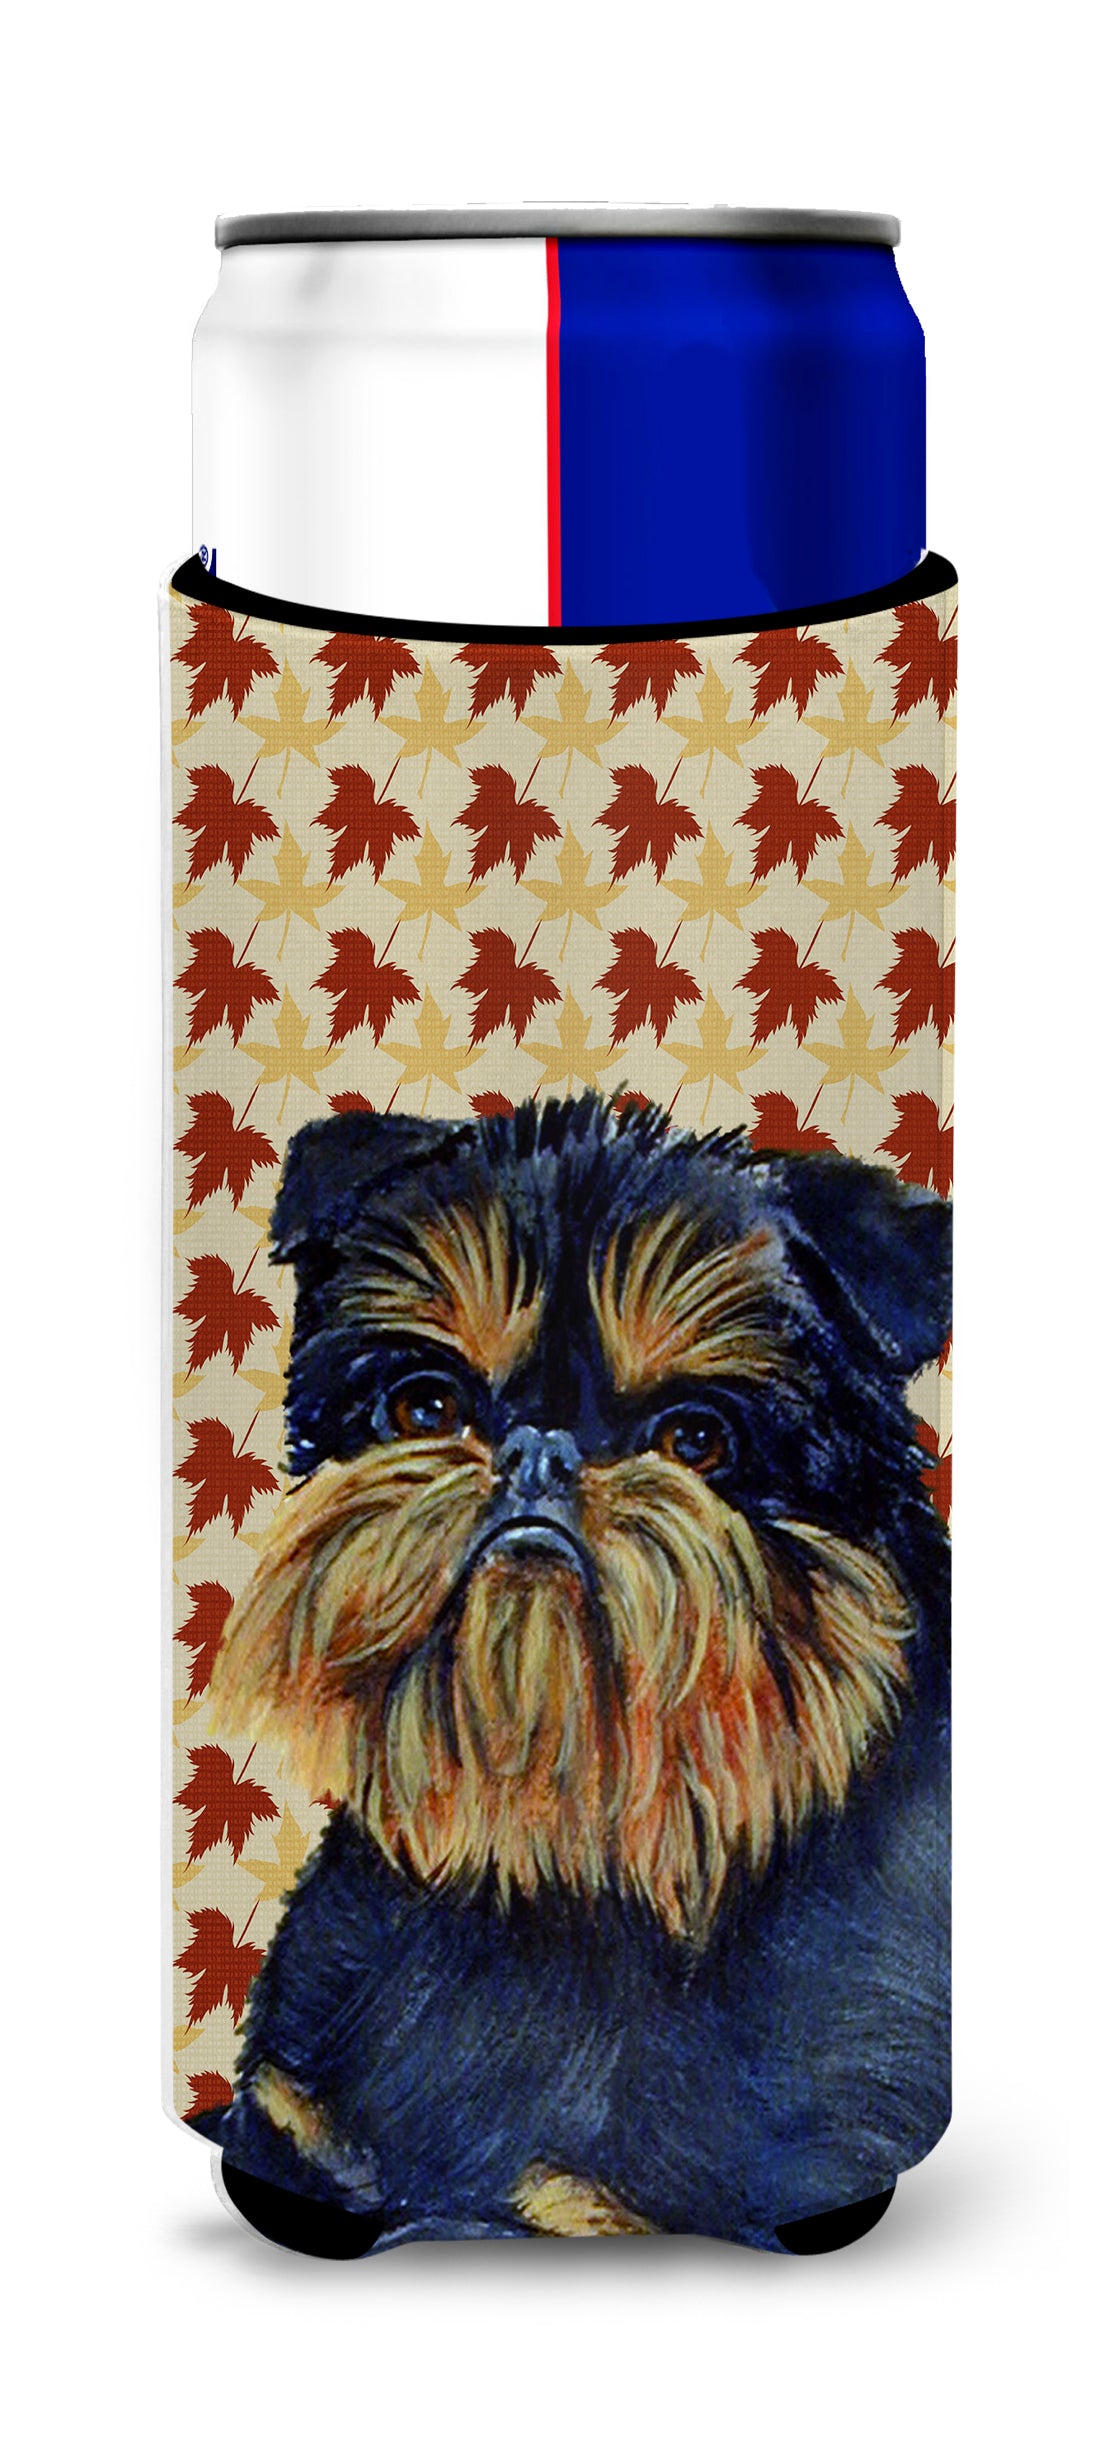 Brussels Griffon Fall Leaves Portrait Ultra Beverage Insulators for slim cans LH9118MUK